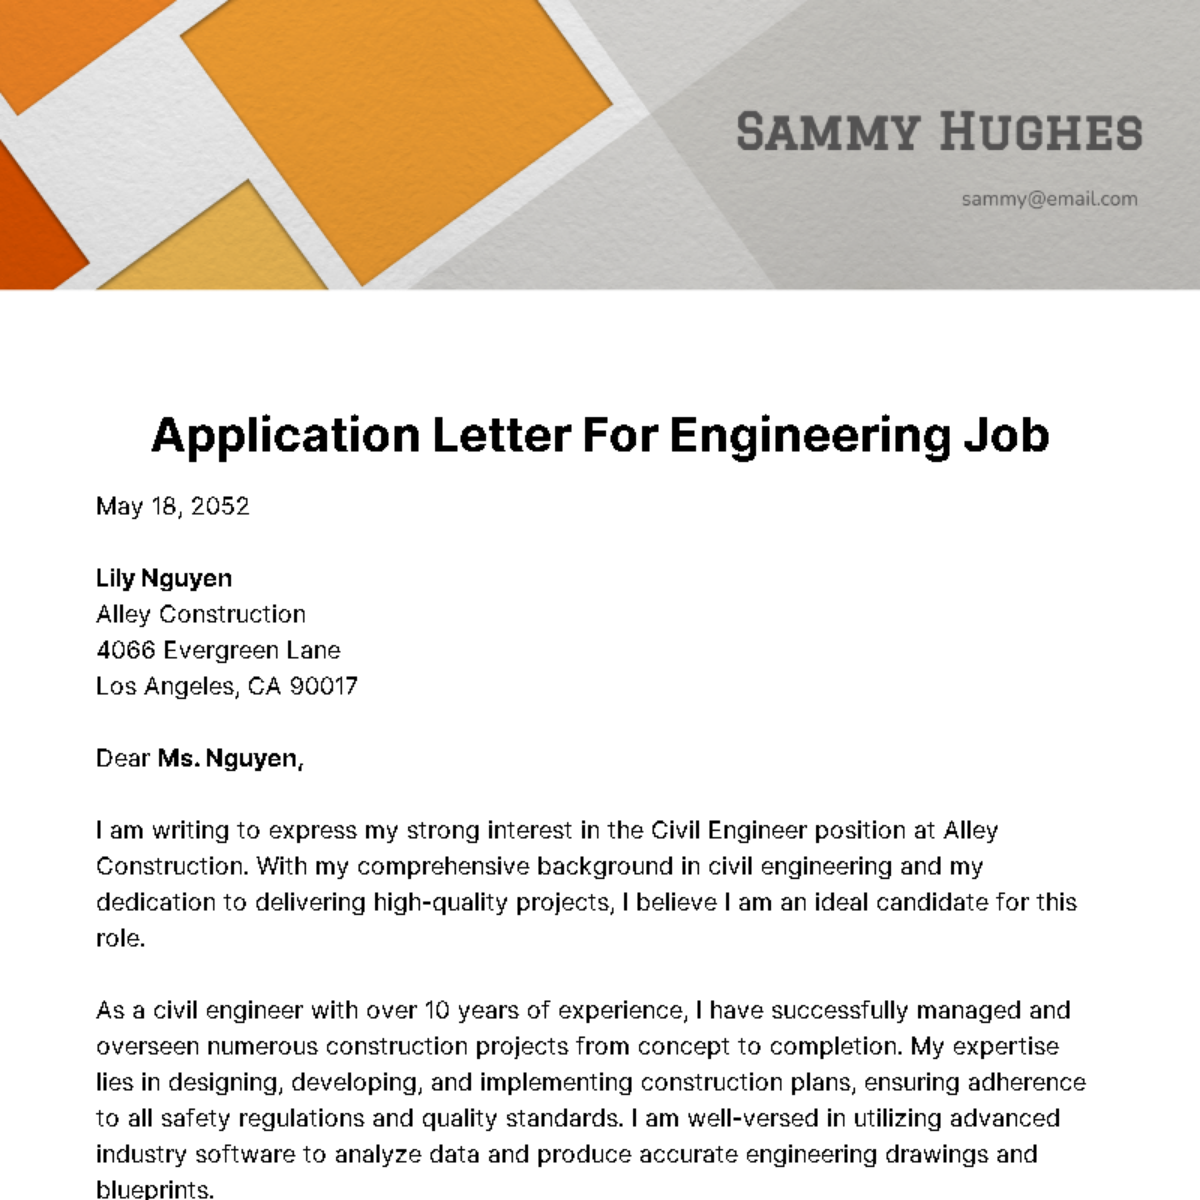 Application Letter for Engineering Job Template